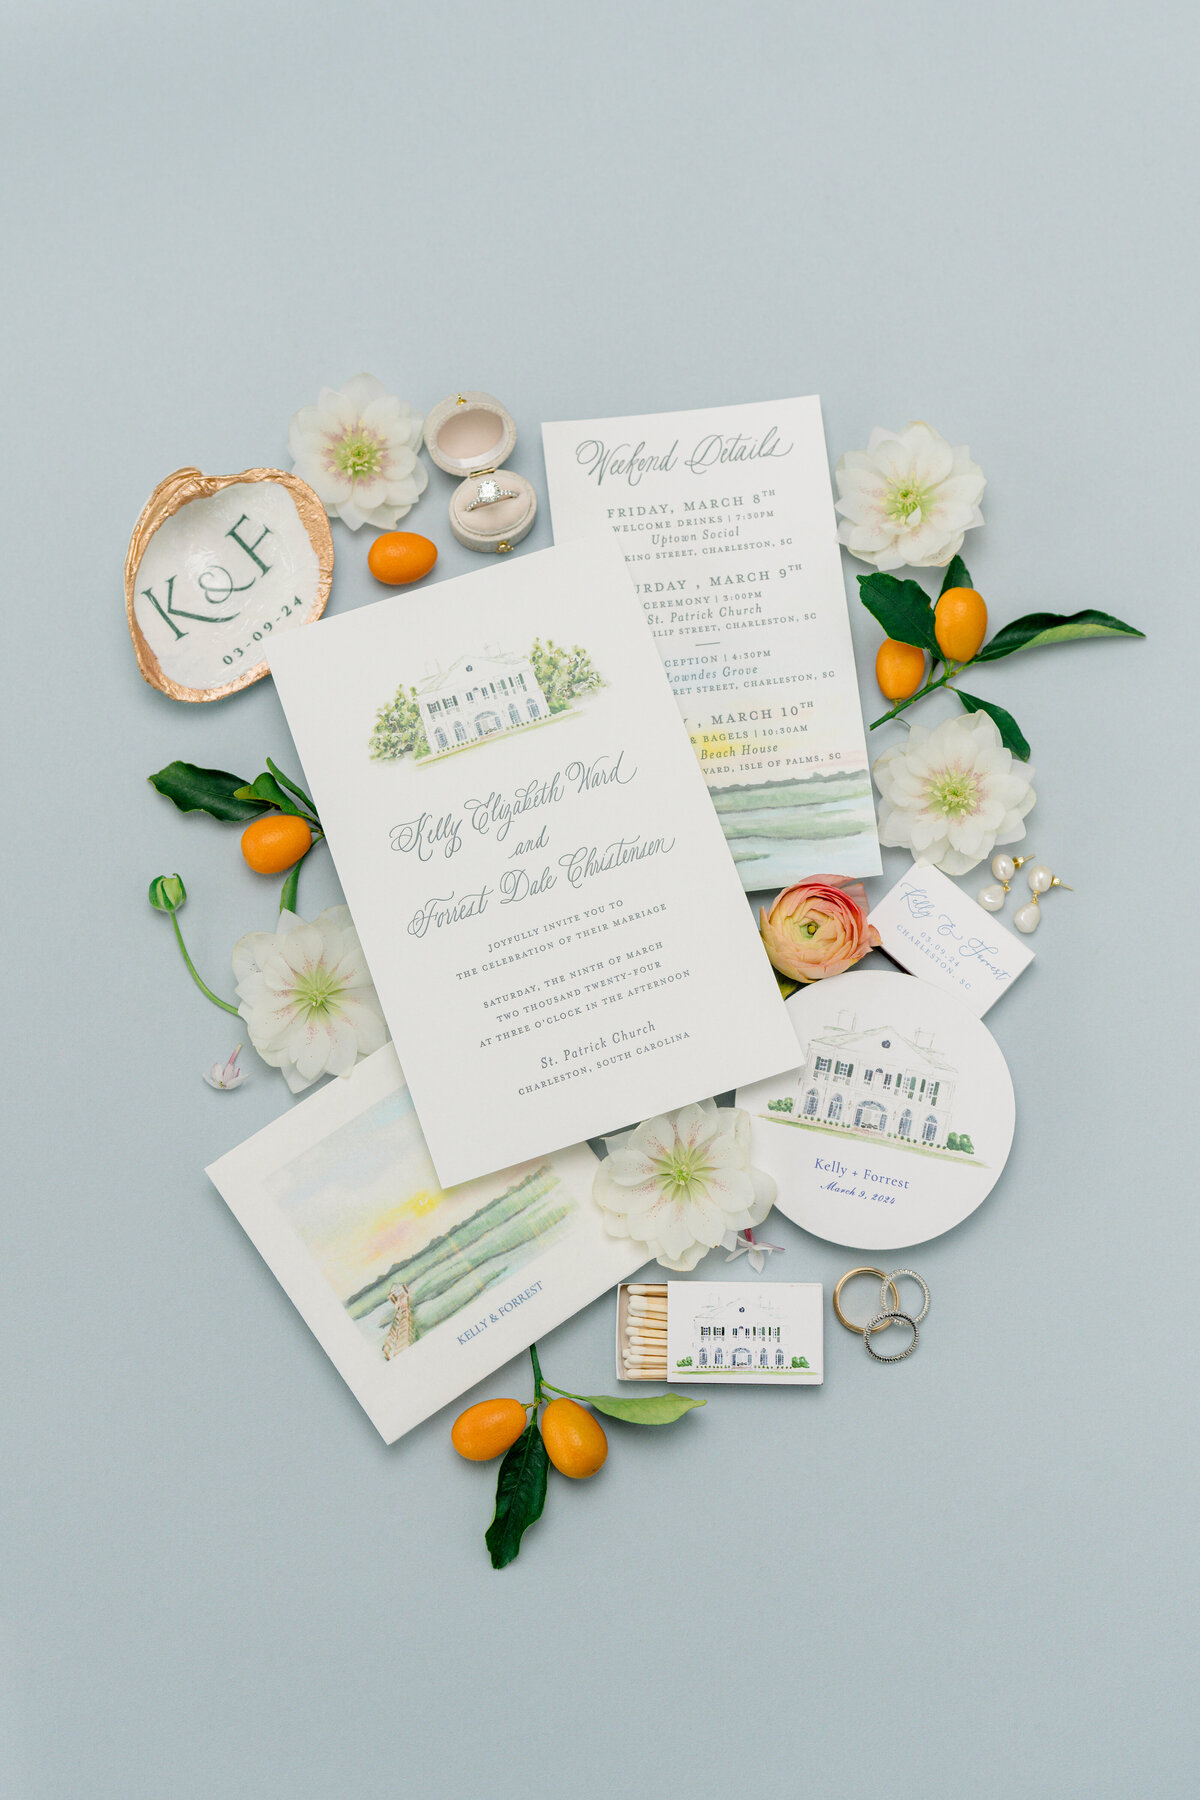 Lowndes Grove wedding invitation. Blue and white with touches of orange kumquats.